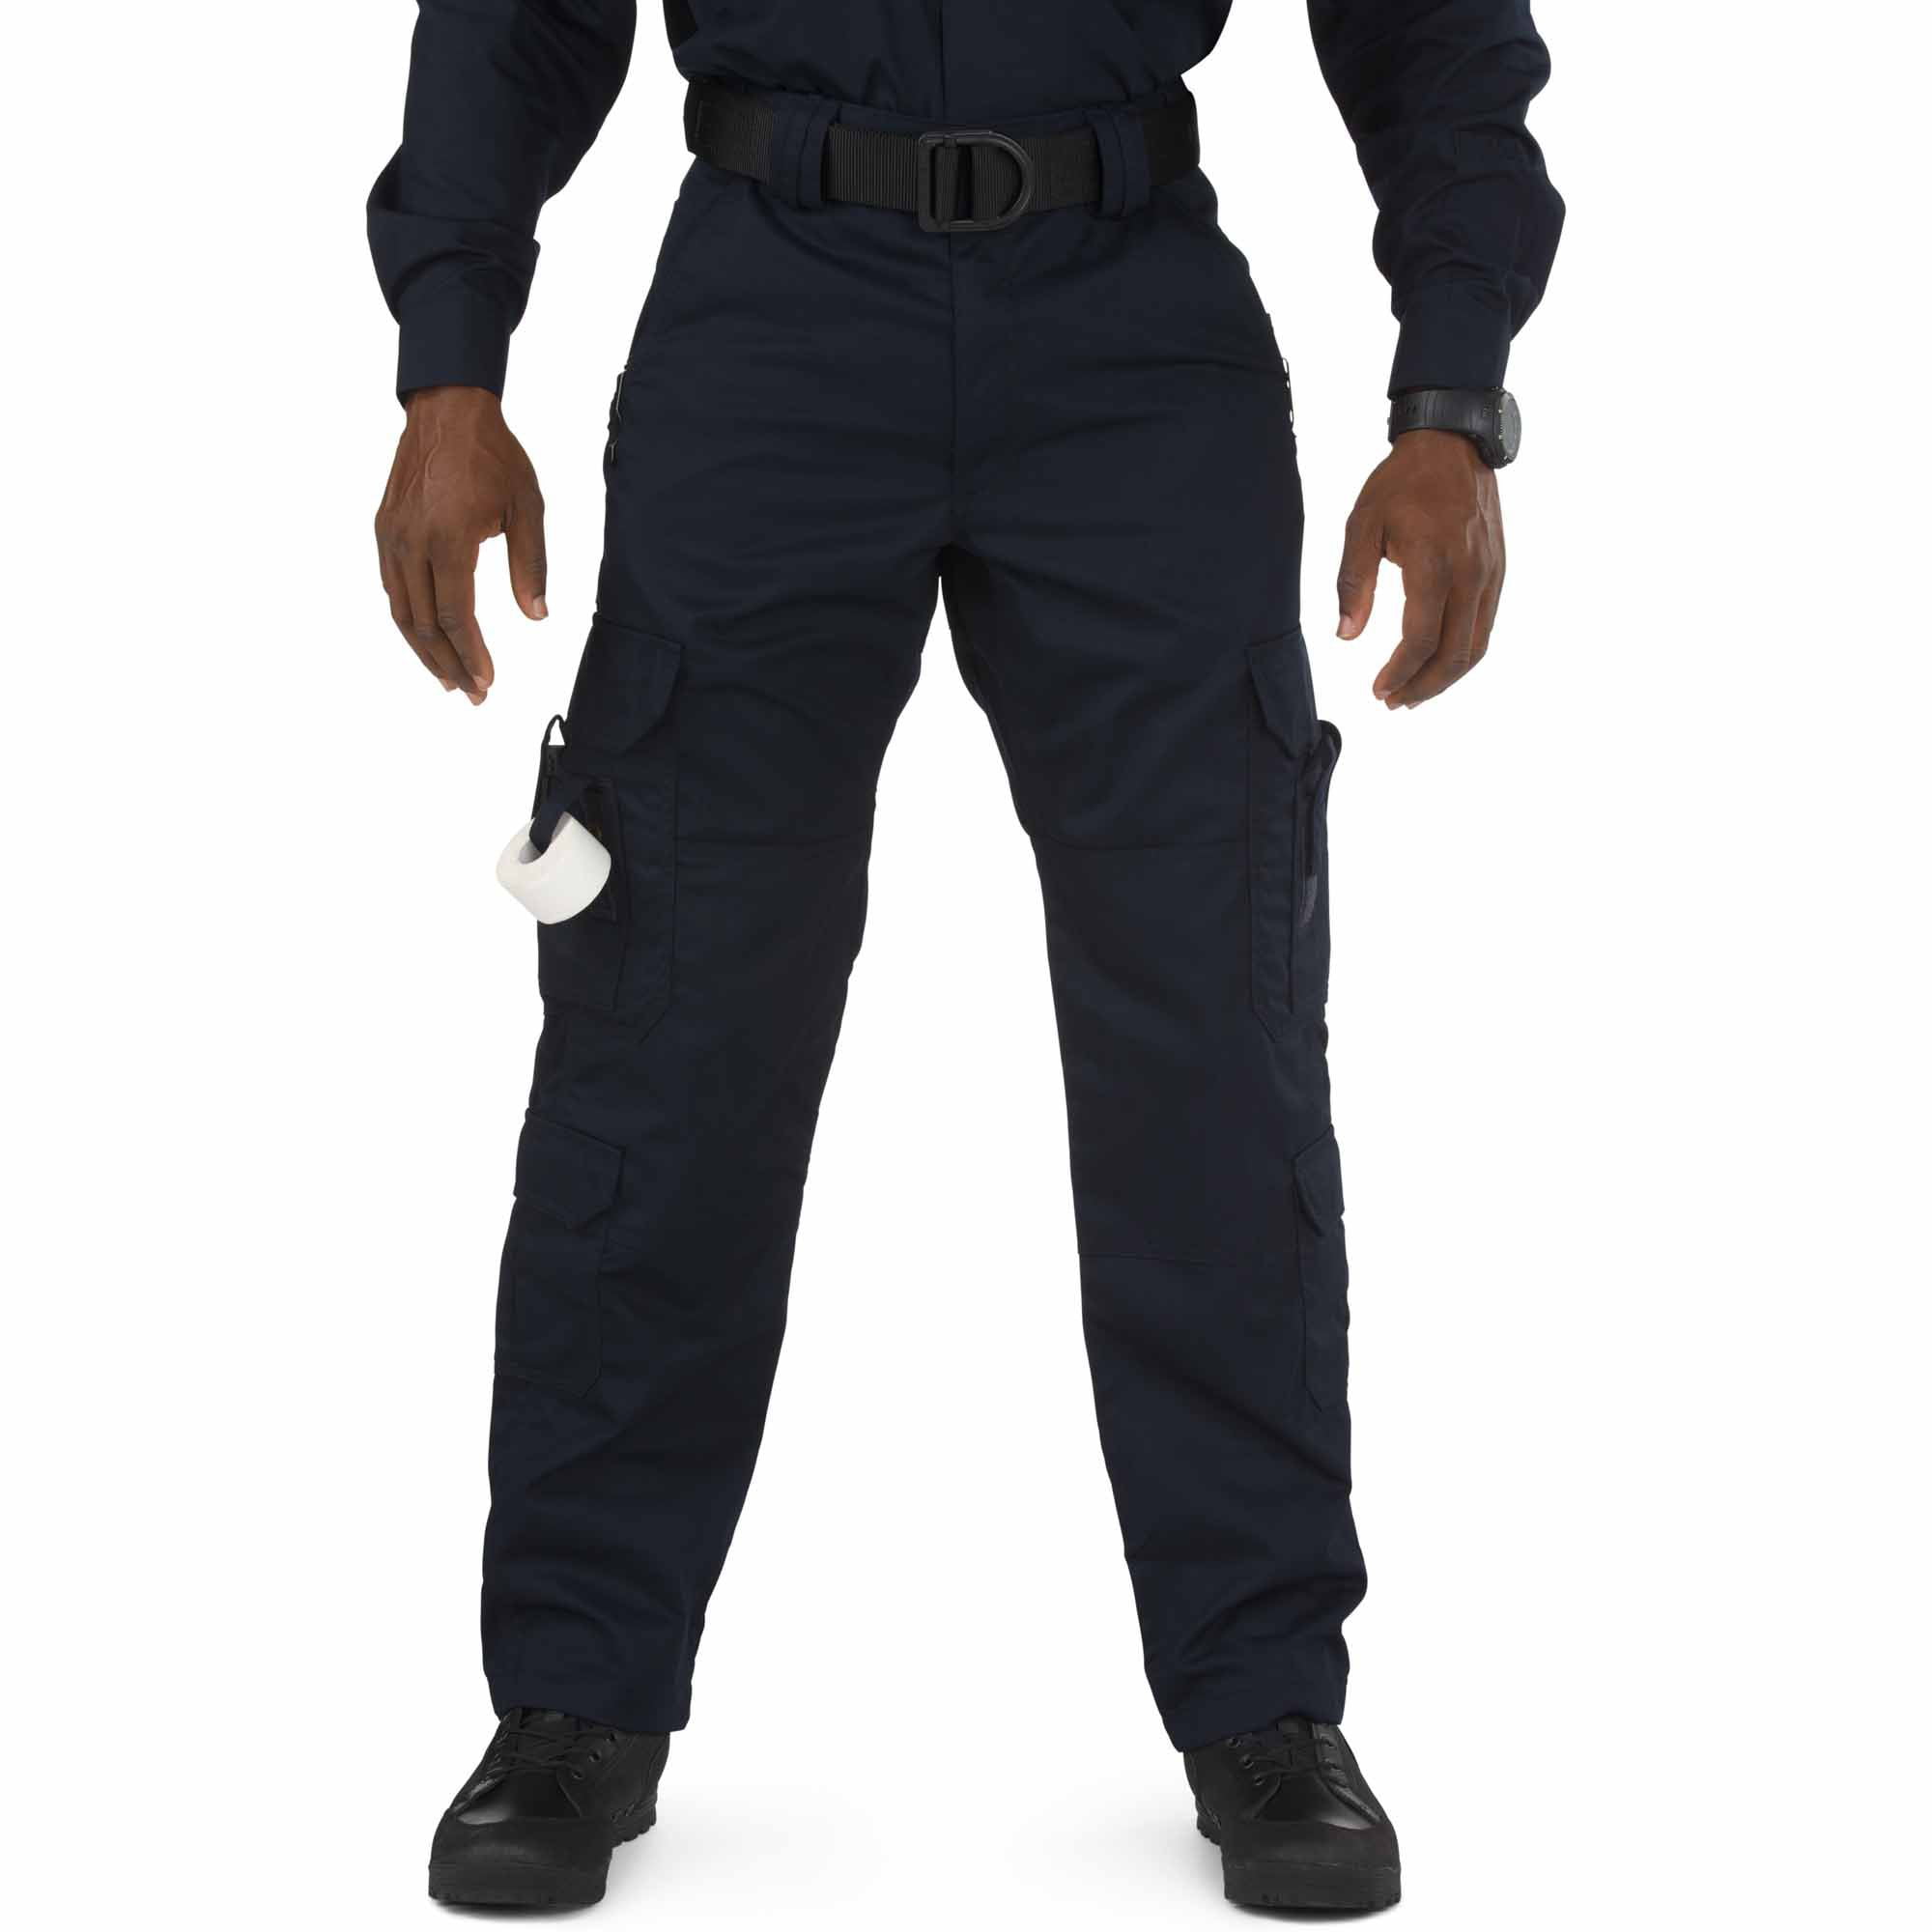 5.11 Tactical EMT EMS Professional Work Pants UPF 50 Fabric Adjustable Waistband Style 74310 